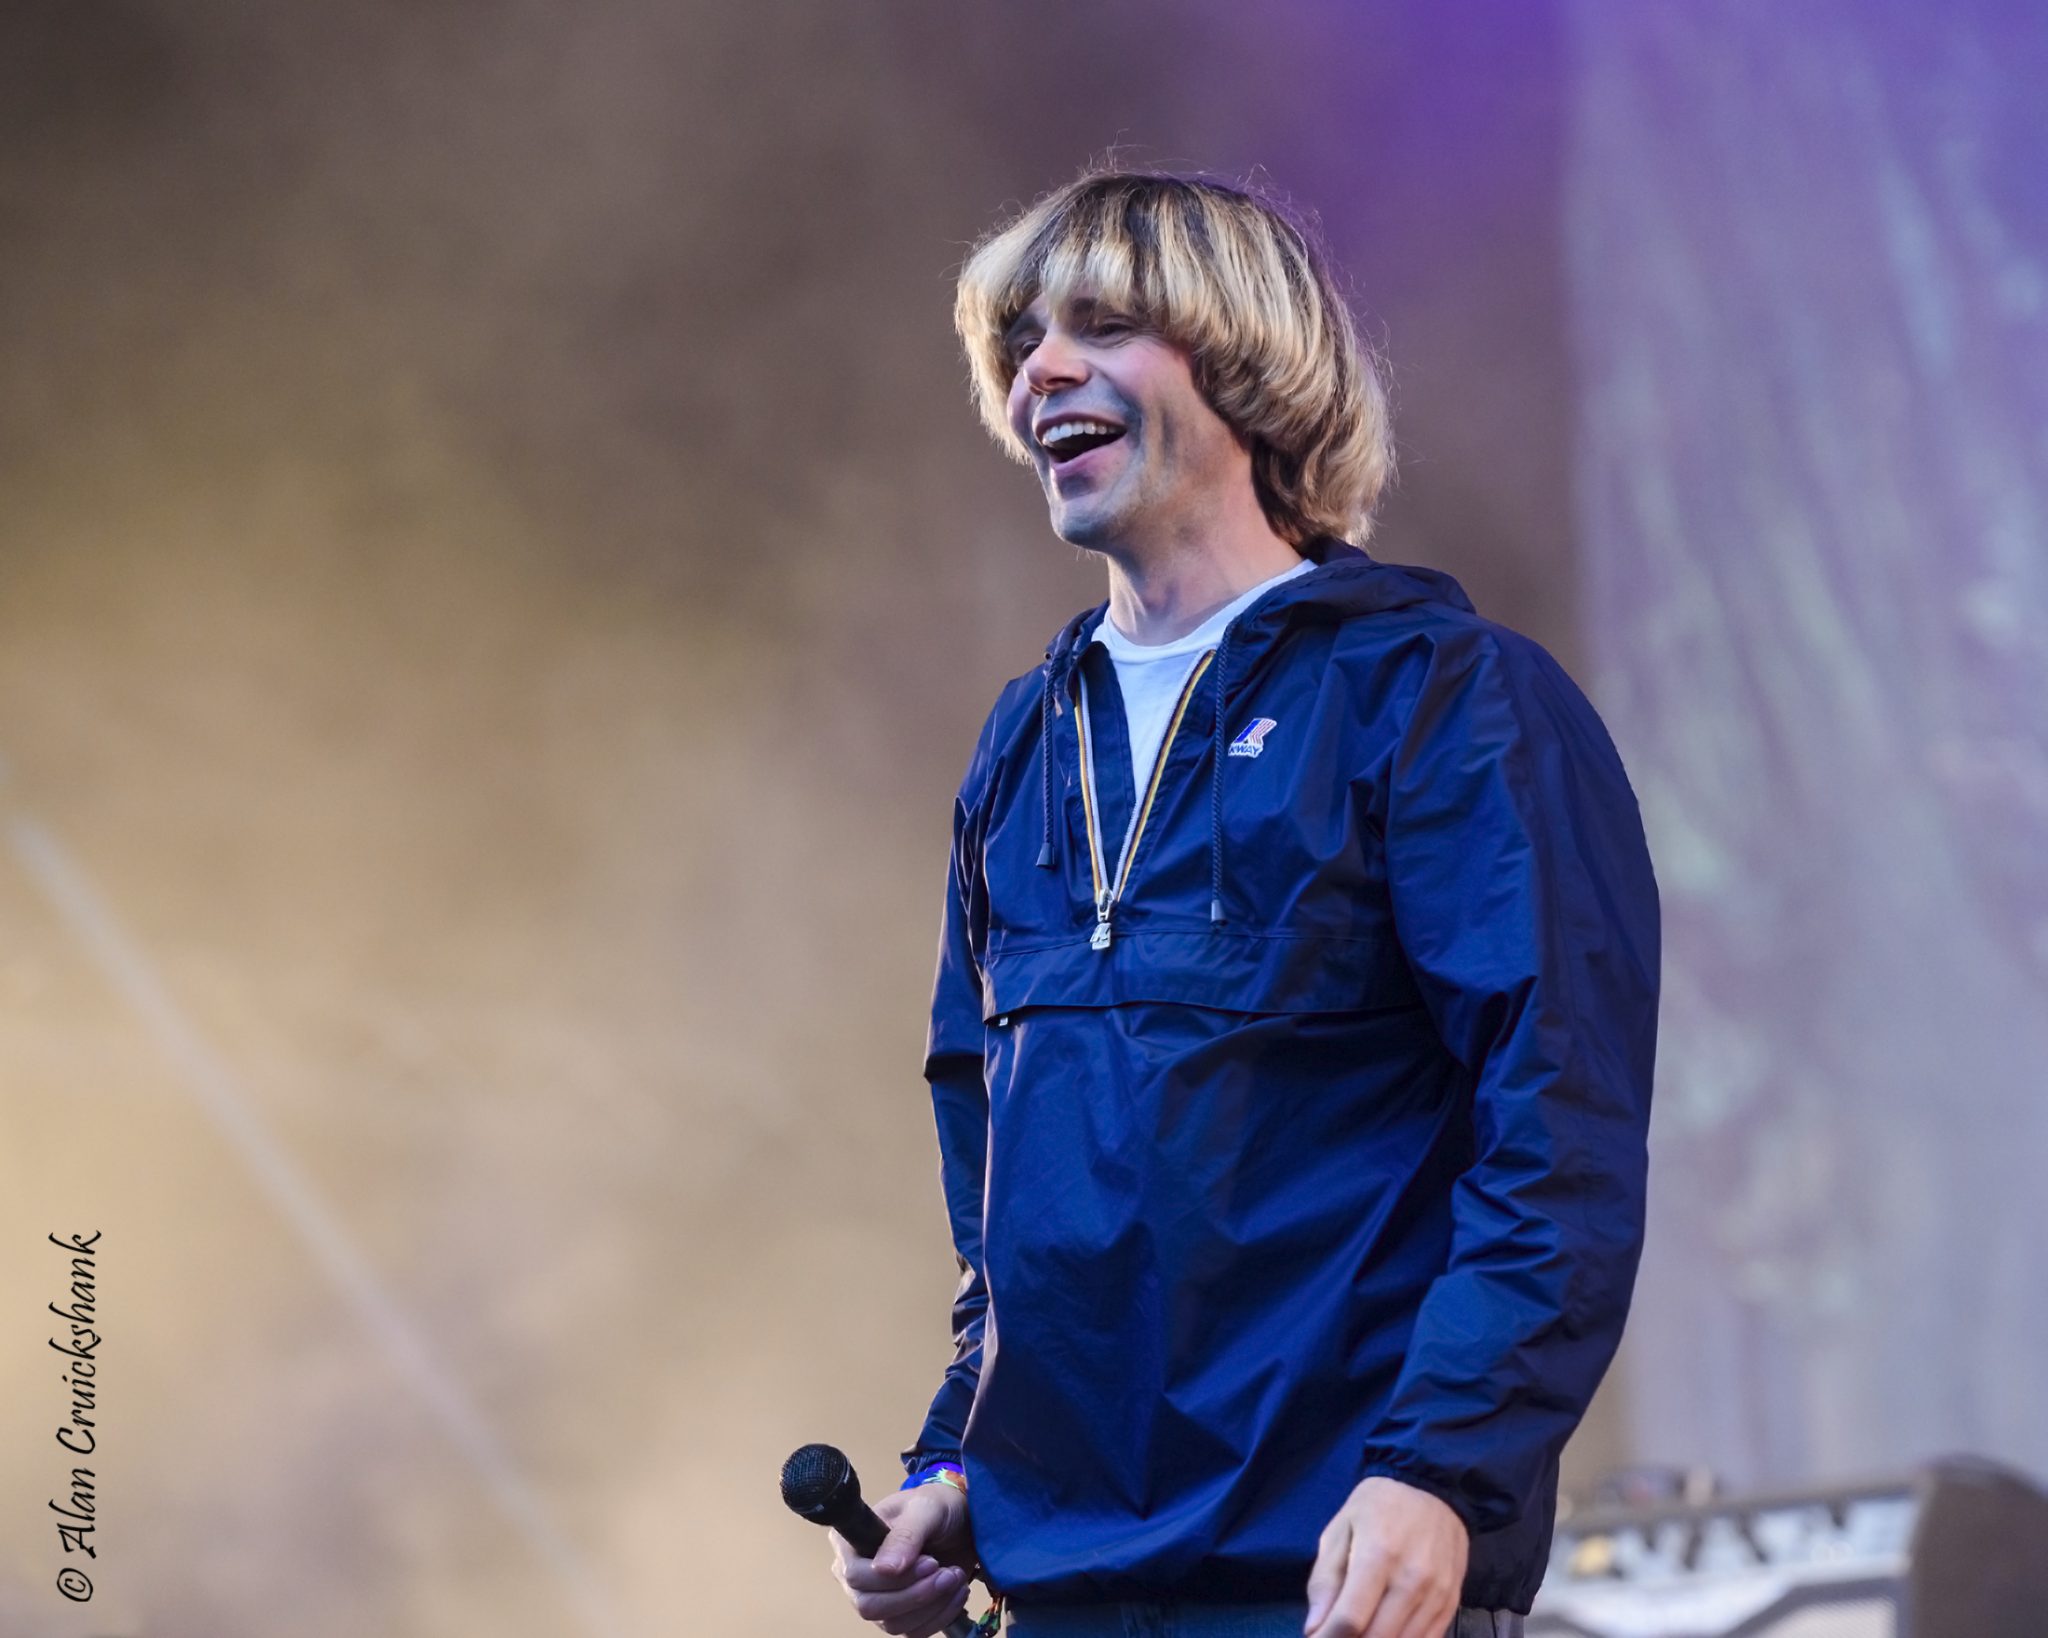 dM3A4 - The Charlatans, Friday Belladrum 2018 - IMAGES